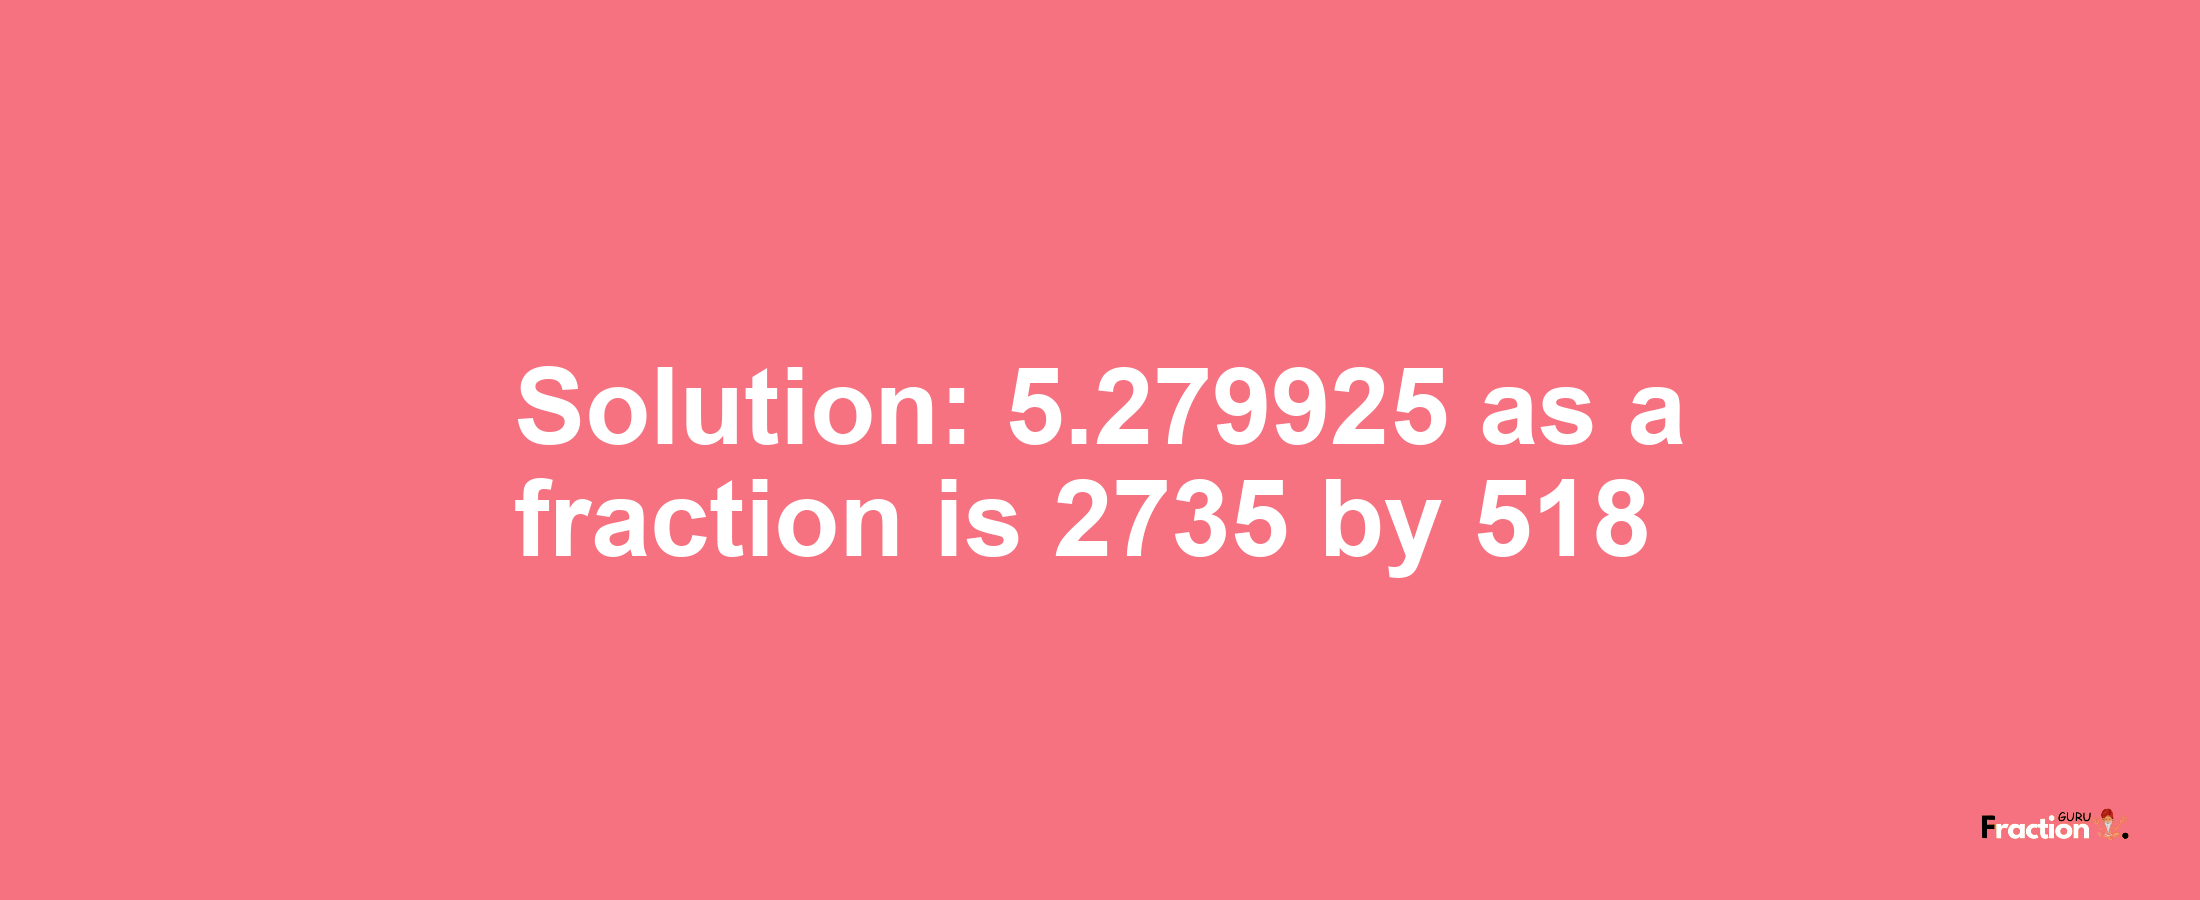 Solution:5.279925 as a fraction is 2735/518